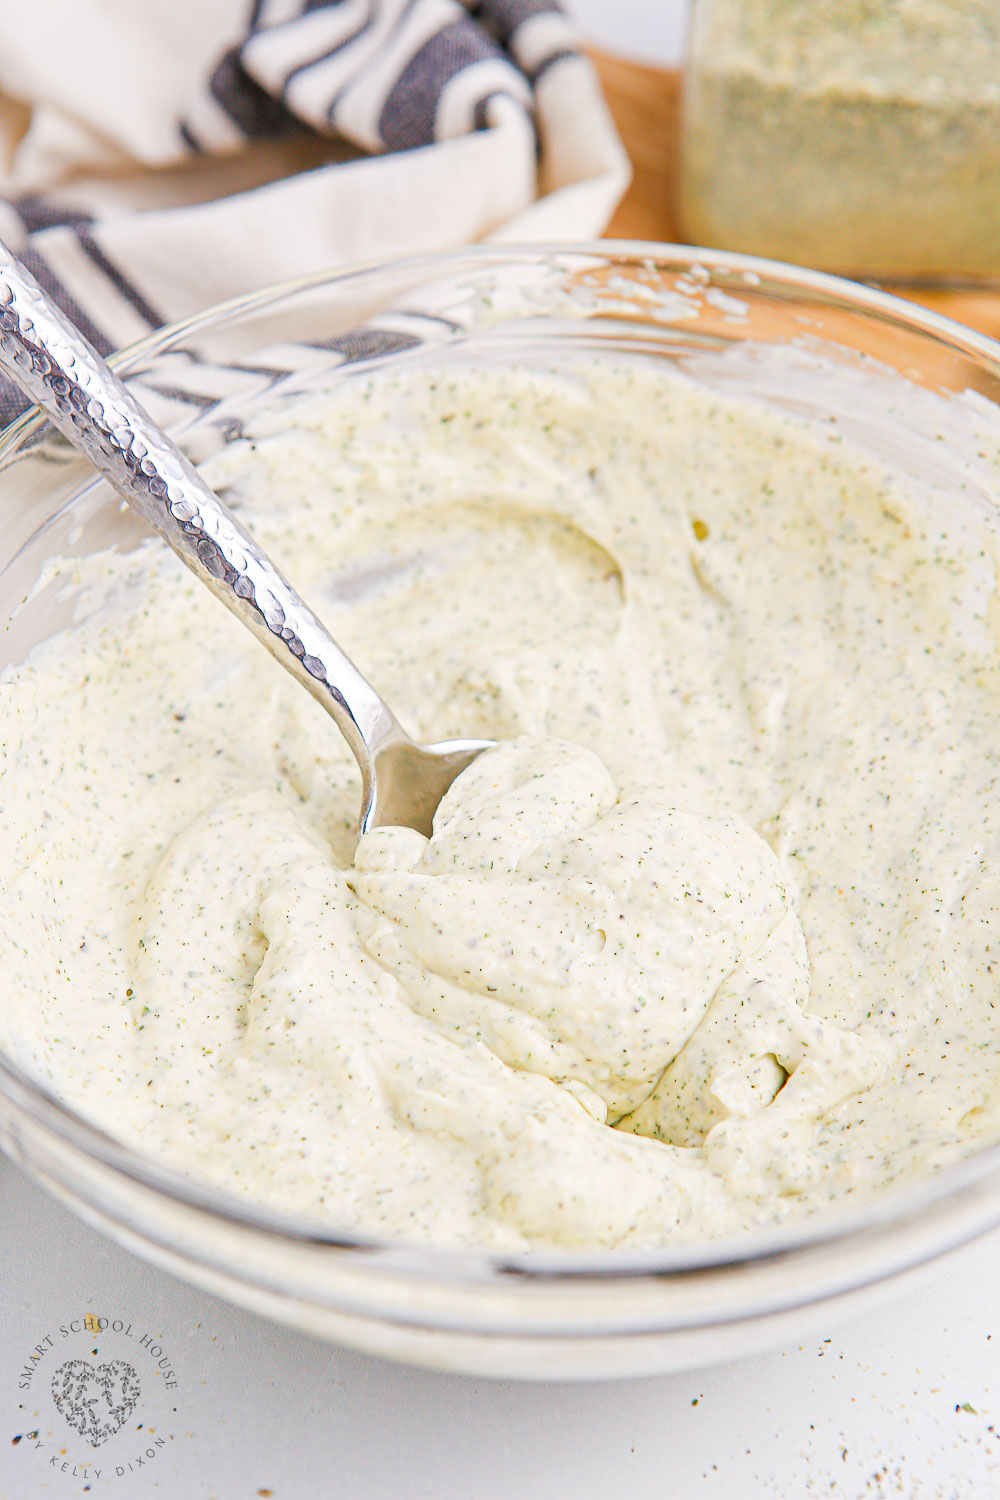 Homemade Ranch Dressing with a blend of easy to find herbs and seasonings, perfect for salads, dips, and more!